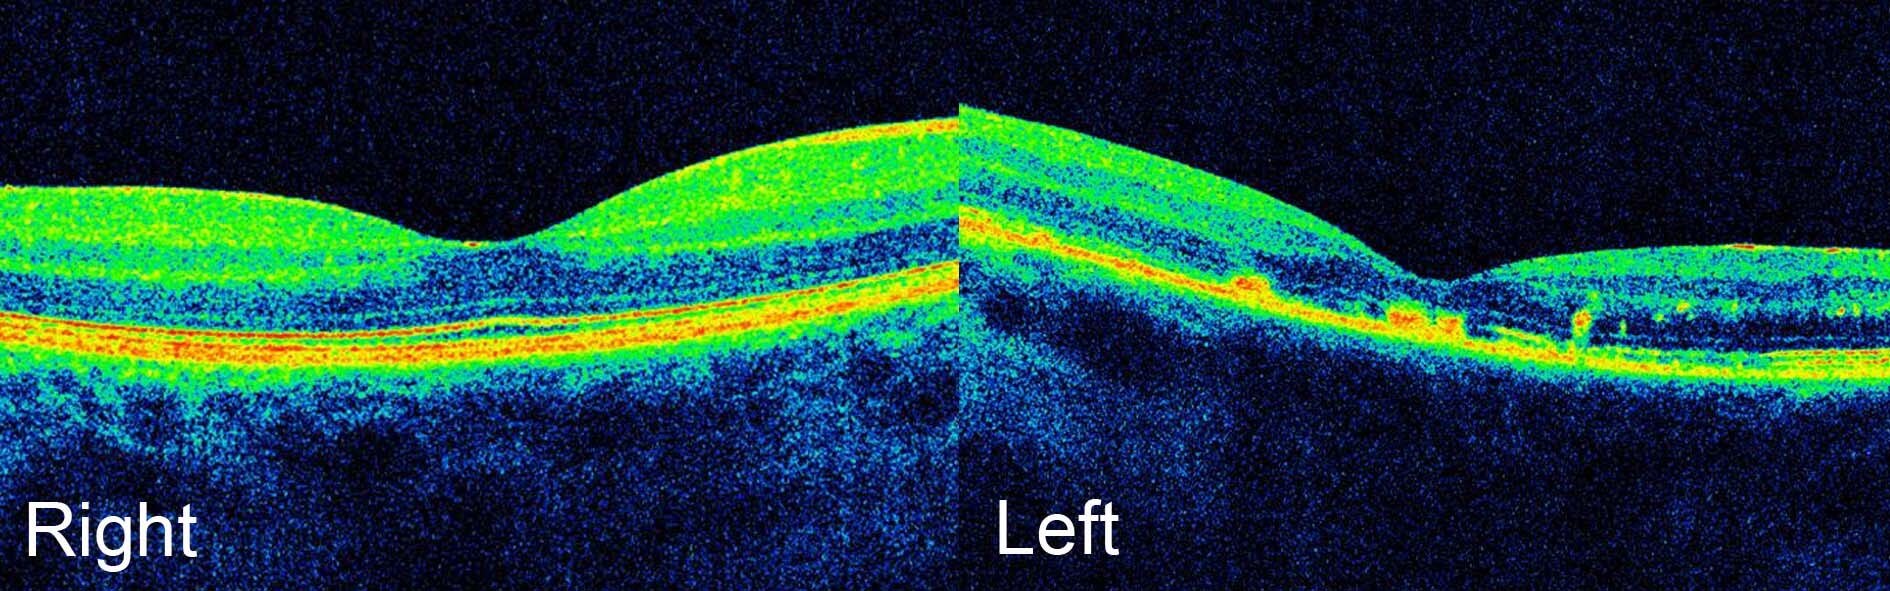 Optical coherence tomography images demonstrates hyper-reflective deposits in the left eye at the level of the retinal pigment epithelium and photoreceptors. There is no macular oedema.